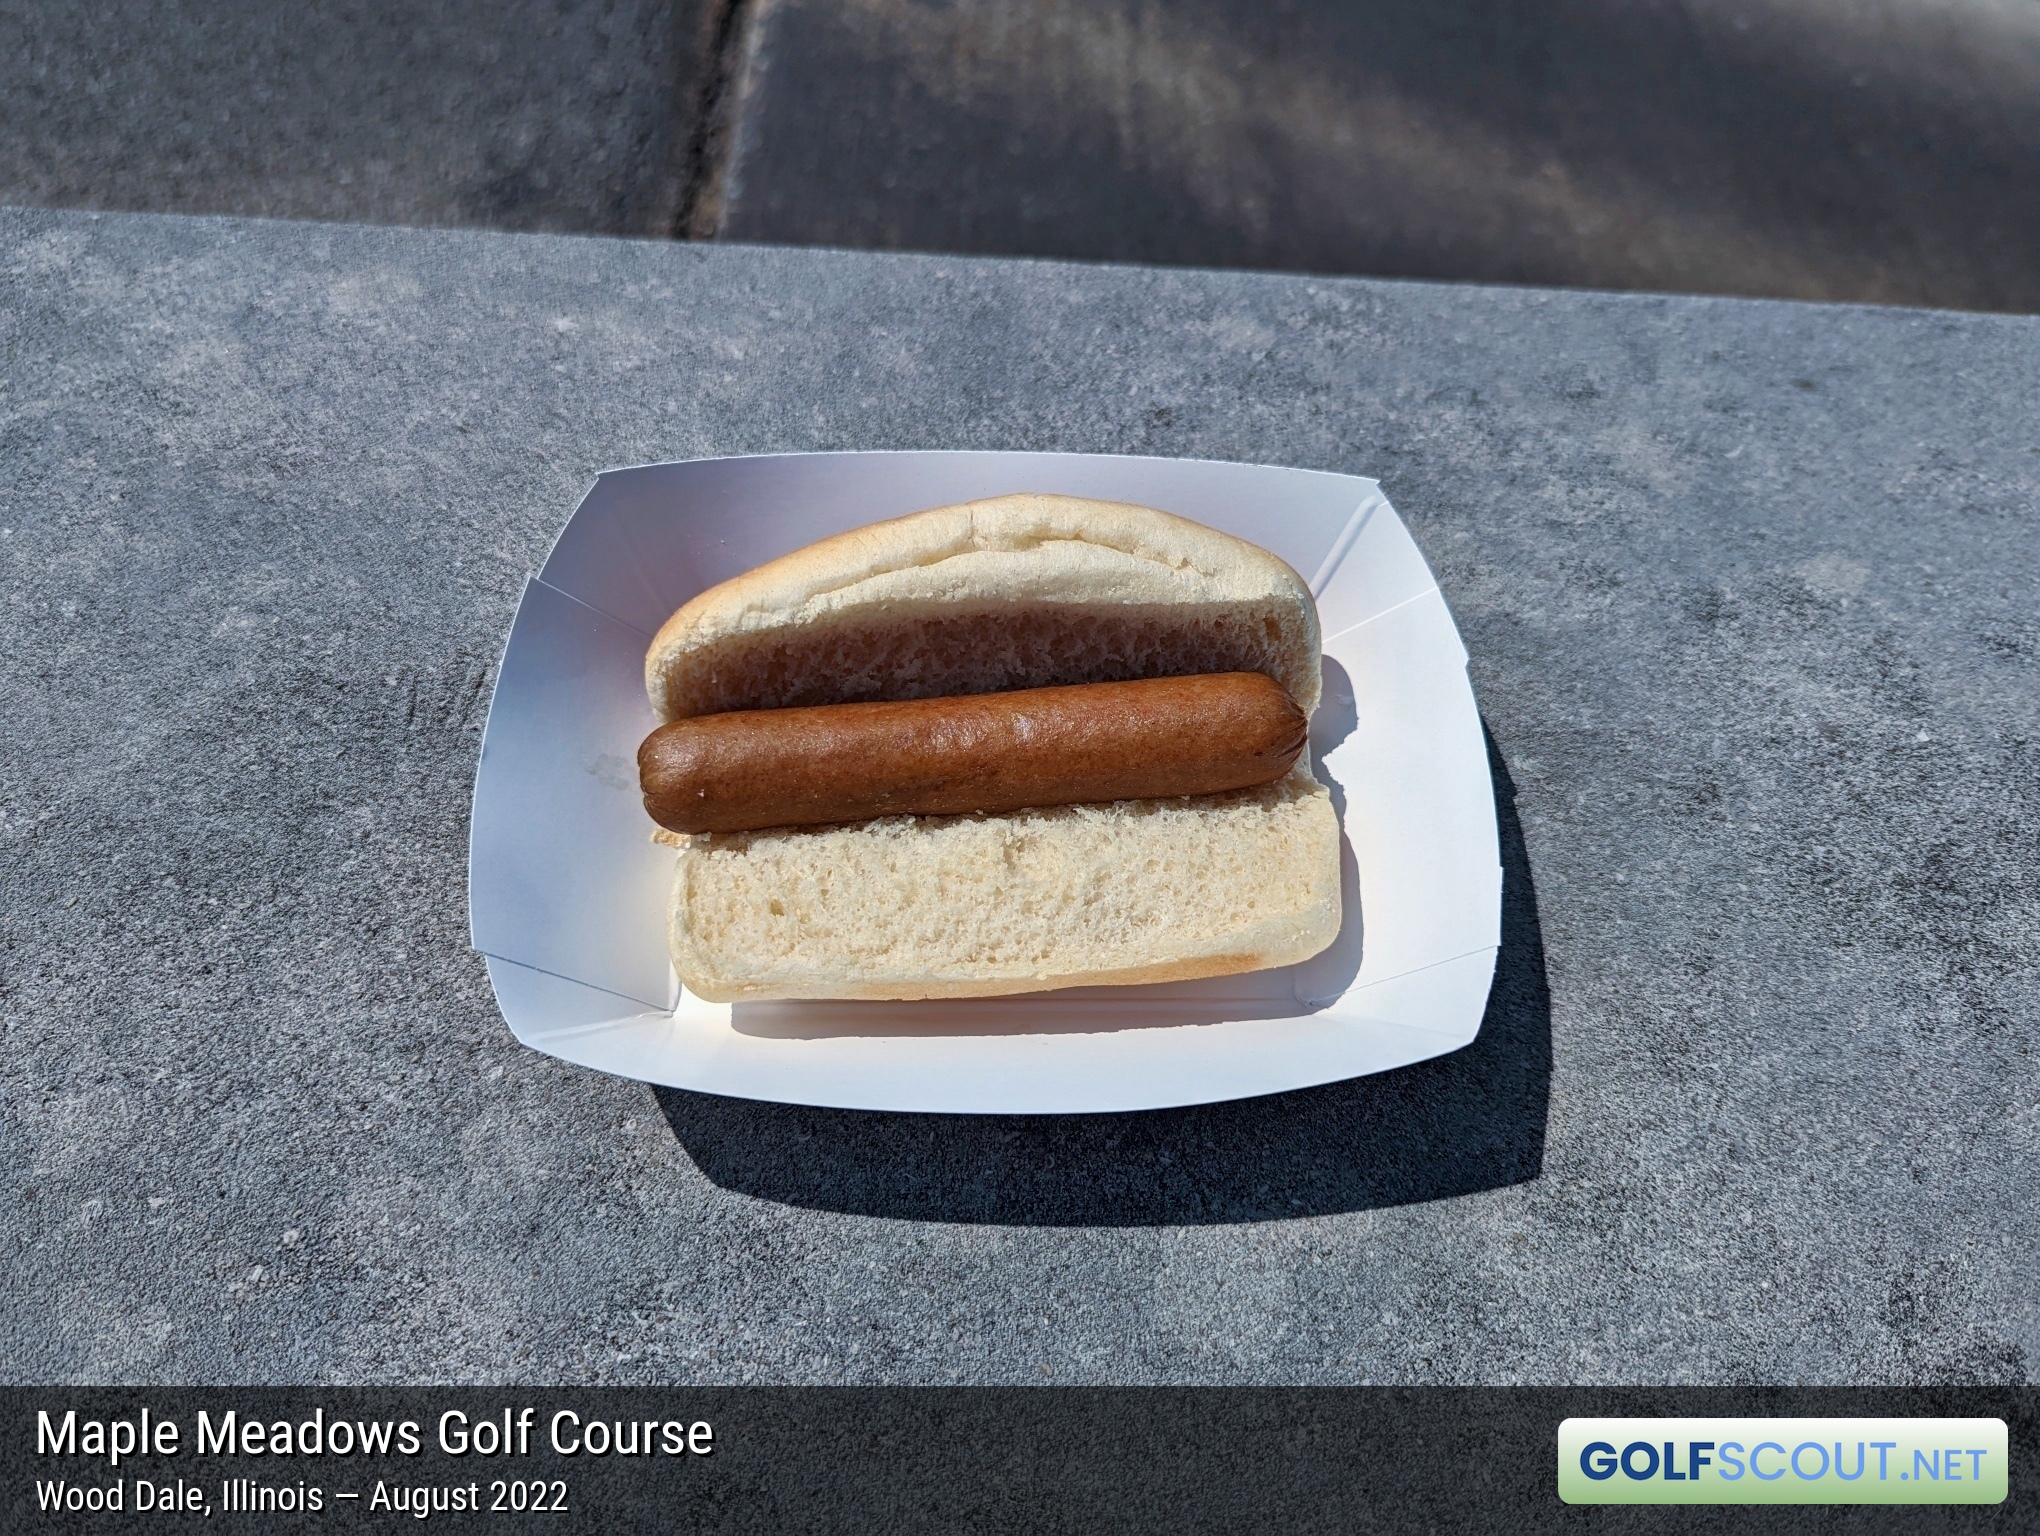 Photo of the food and dining at Maple Meadows Golf Course in Wood Dale, Illinois. Photo of the hot dog at Maple Meadows Golf Course in Wood Dale, Illinois.